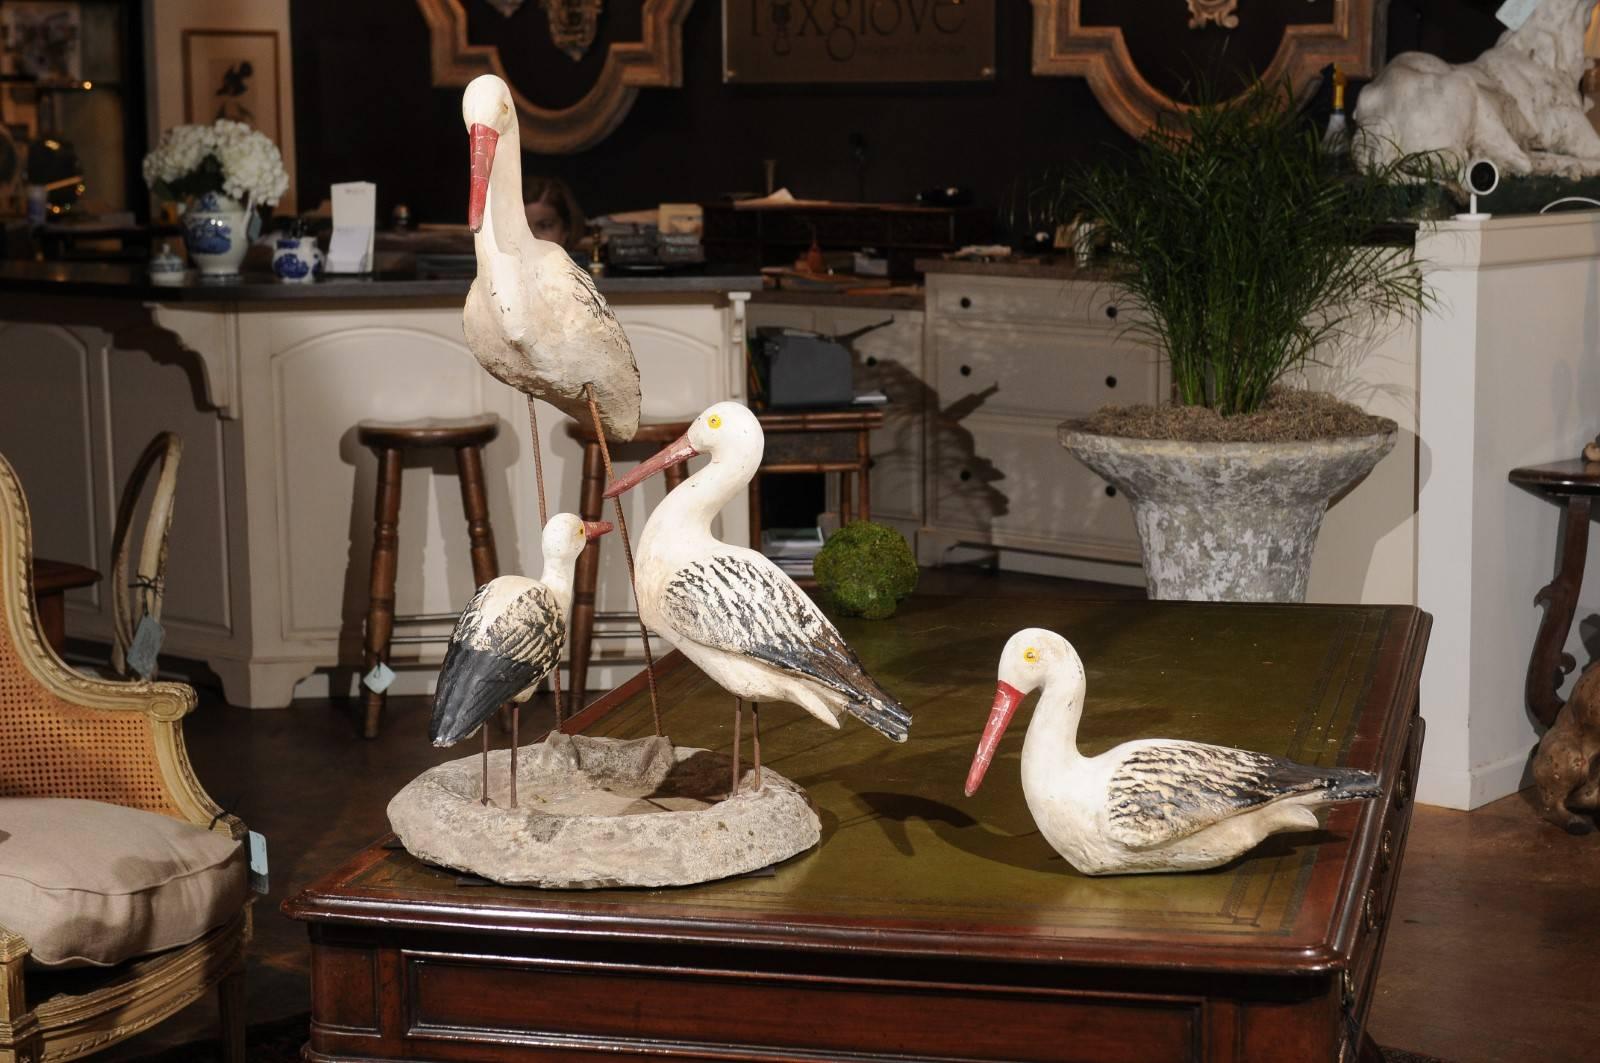 A set of Sicilian lifesize painted stone shorebird sculptures from the early 20th century. This set of shorebirds comprises a central stone bowl on which are mounted three birds, as well as a single bird that can be placed on the side. The rugged